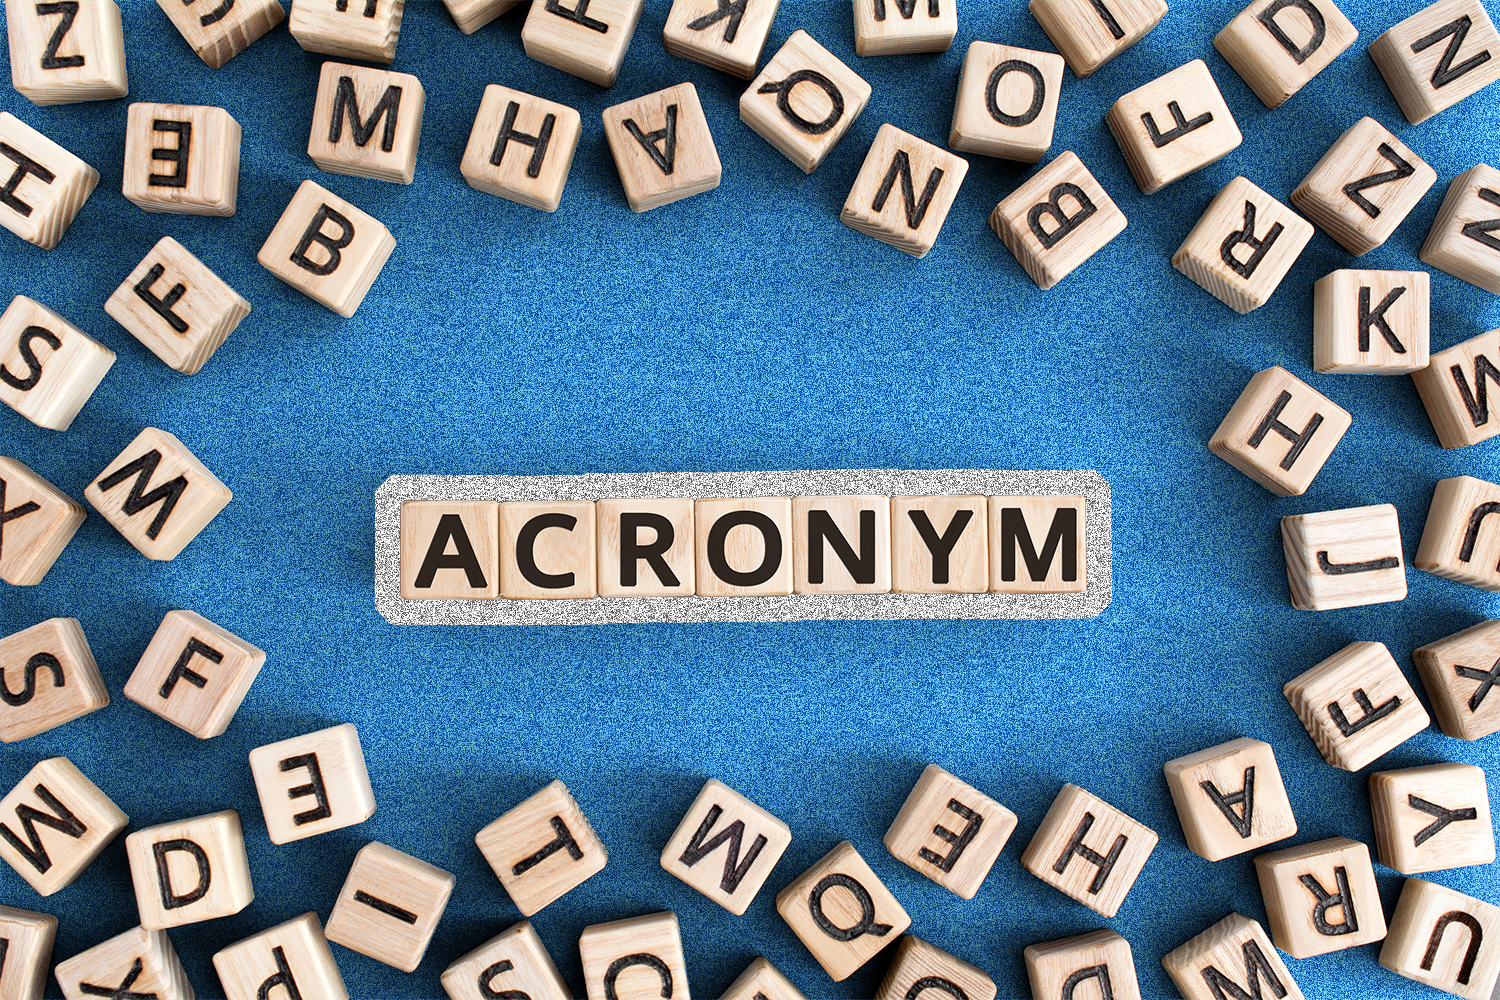 Letter blocks that spell out the word "acronym"